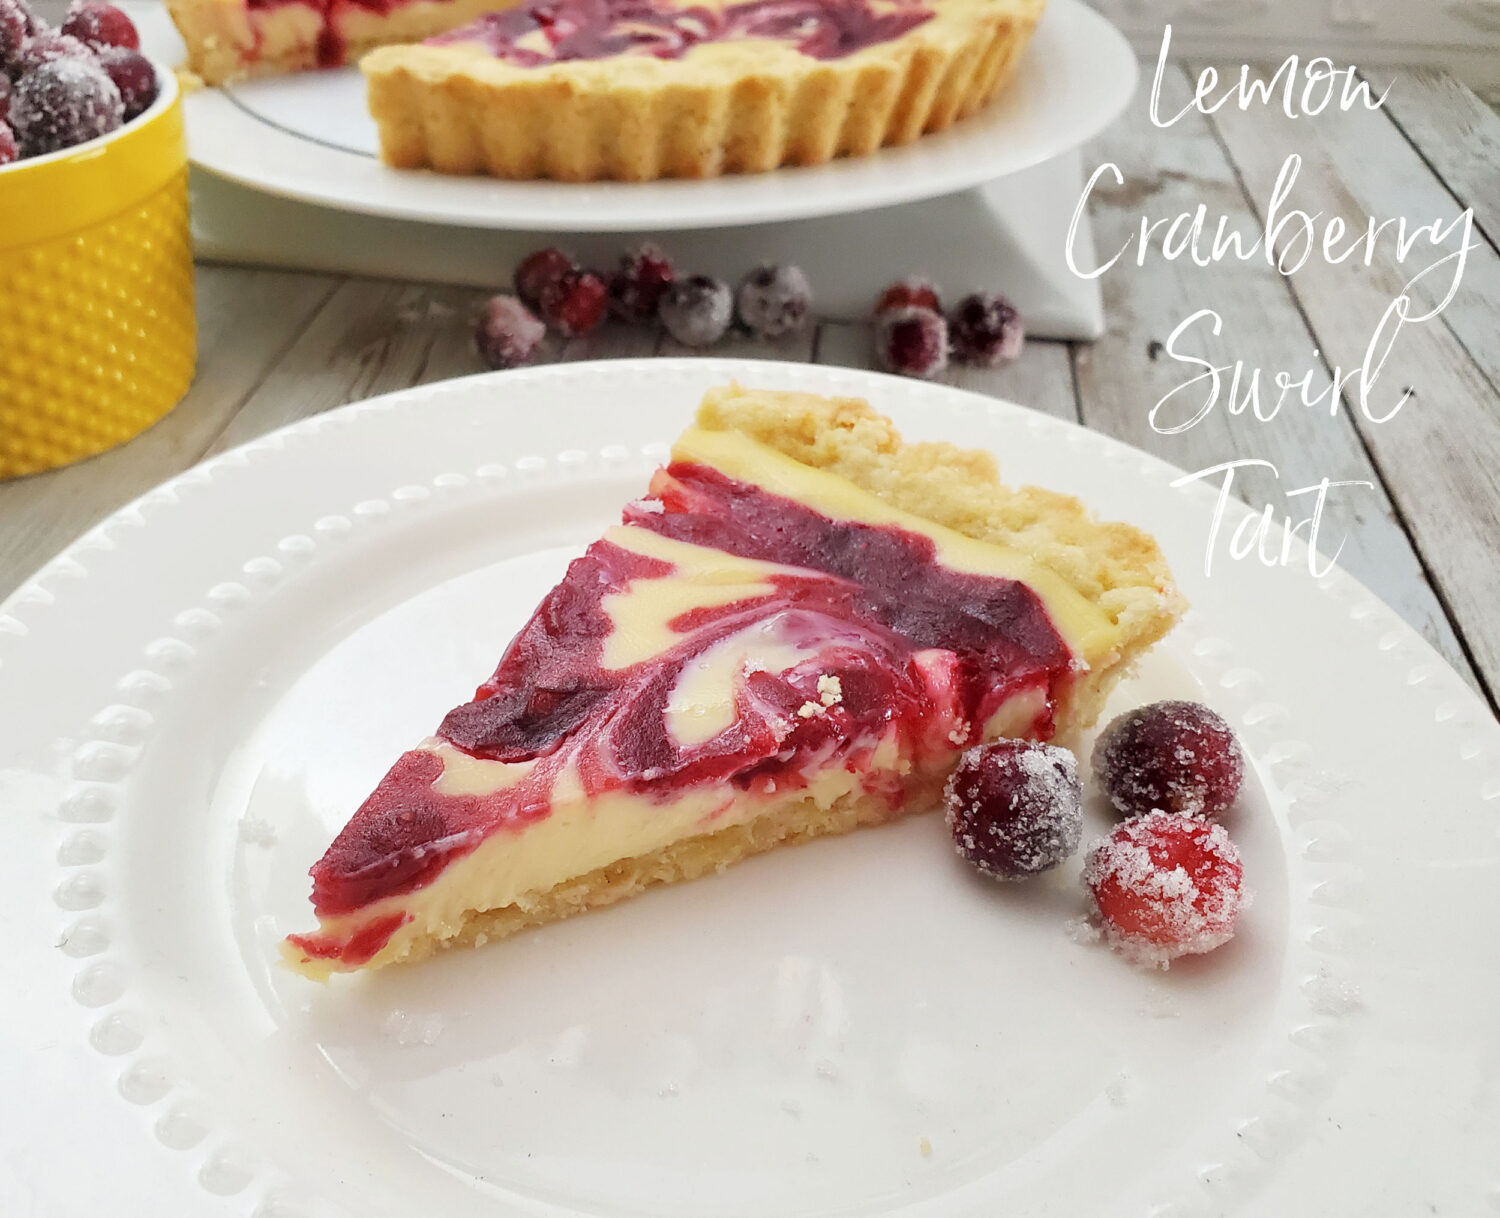 Creamy lemon filling ever with homemade cranberry orange-infused jam in a buttery shortbread crust, topped with luscious sugared cranberries.